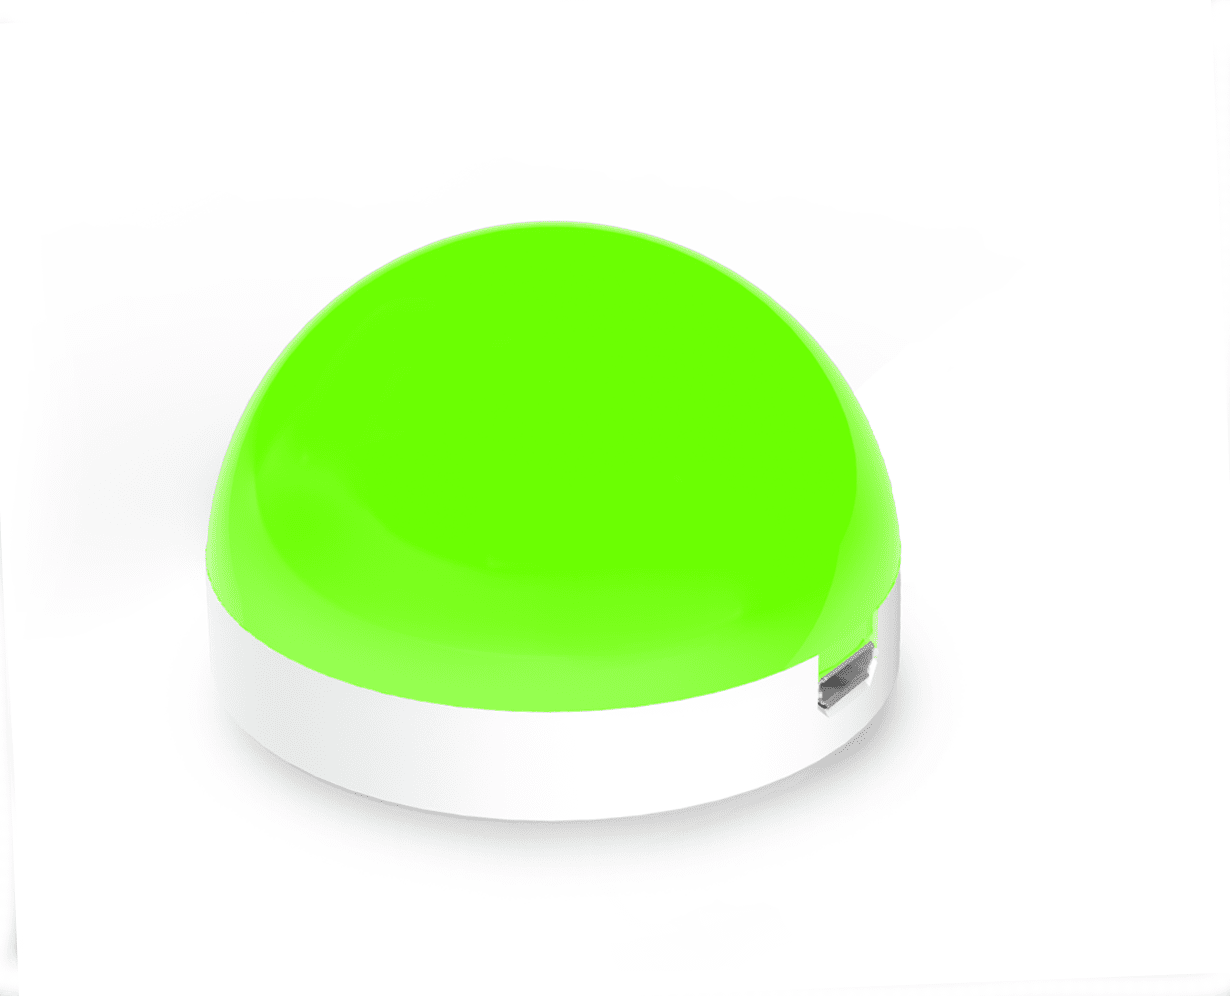 Luxafor Orb is a wide-angle USB LED do not disturb light indicator that helps eliminate distractions